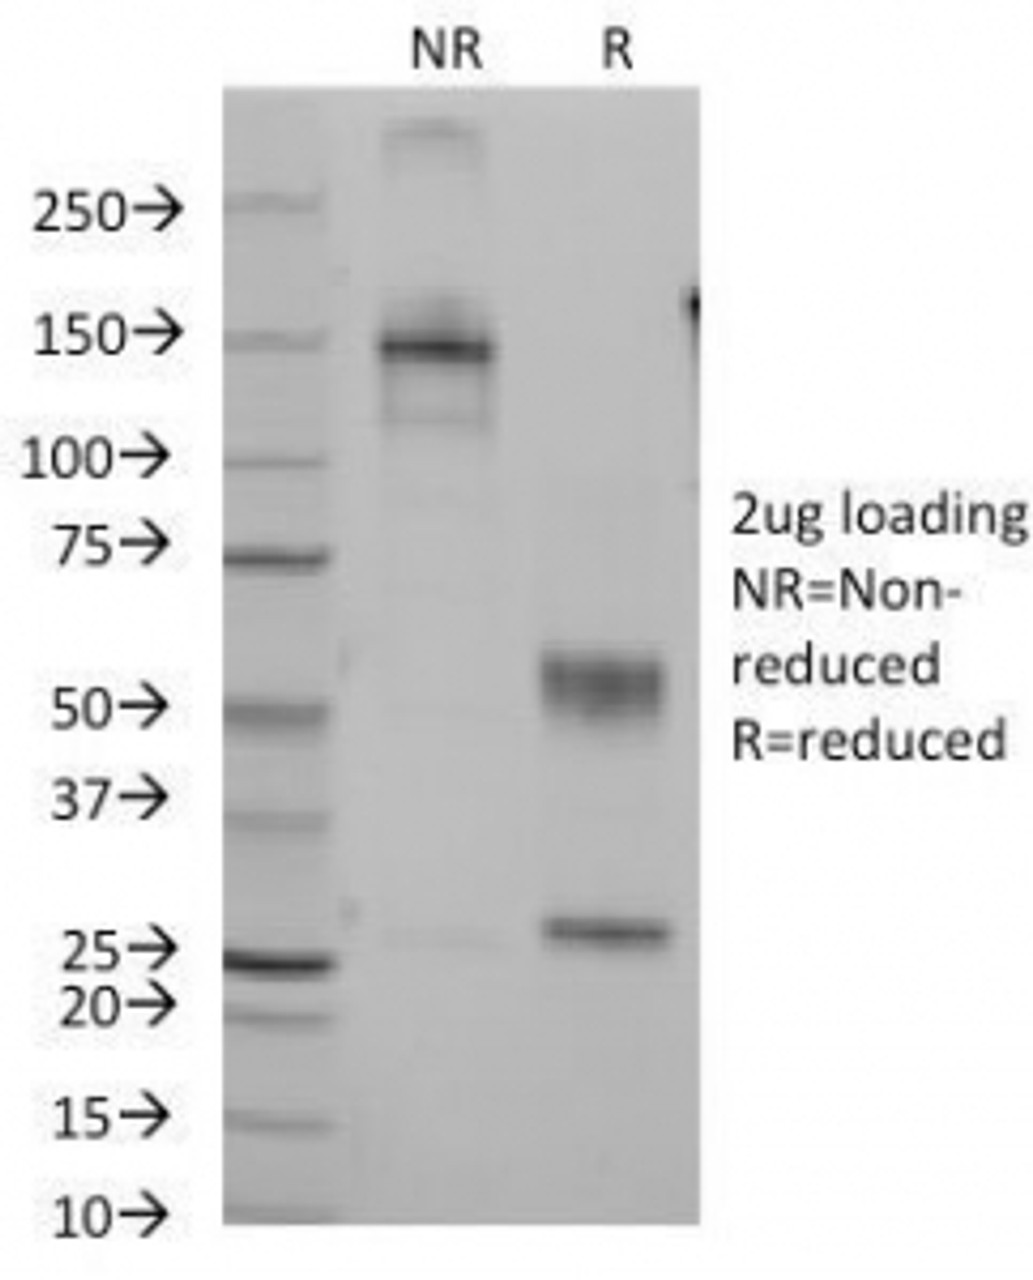 SDS-PAGE Analysis of Purified, BSA-Free CD7 Antibody (clone B-F12) . Confirmation of Integrity and Purity of the Antibody.